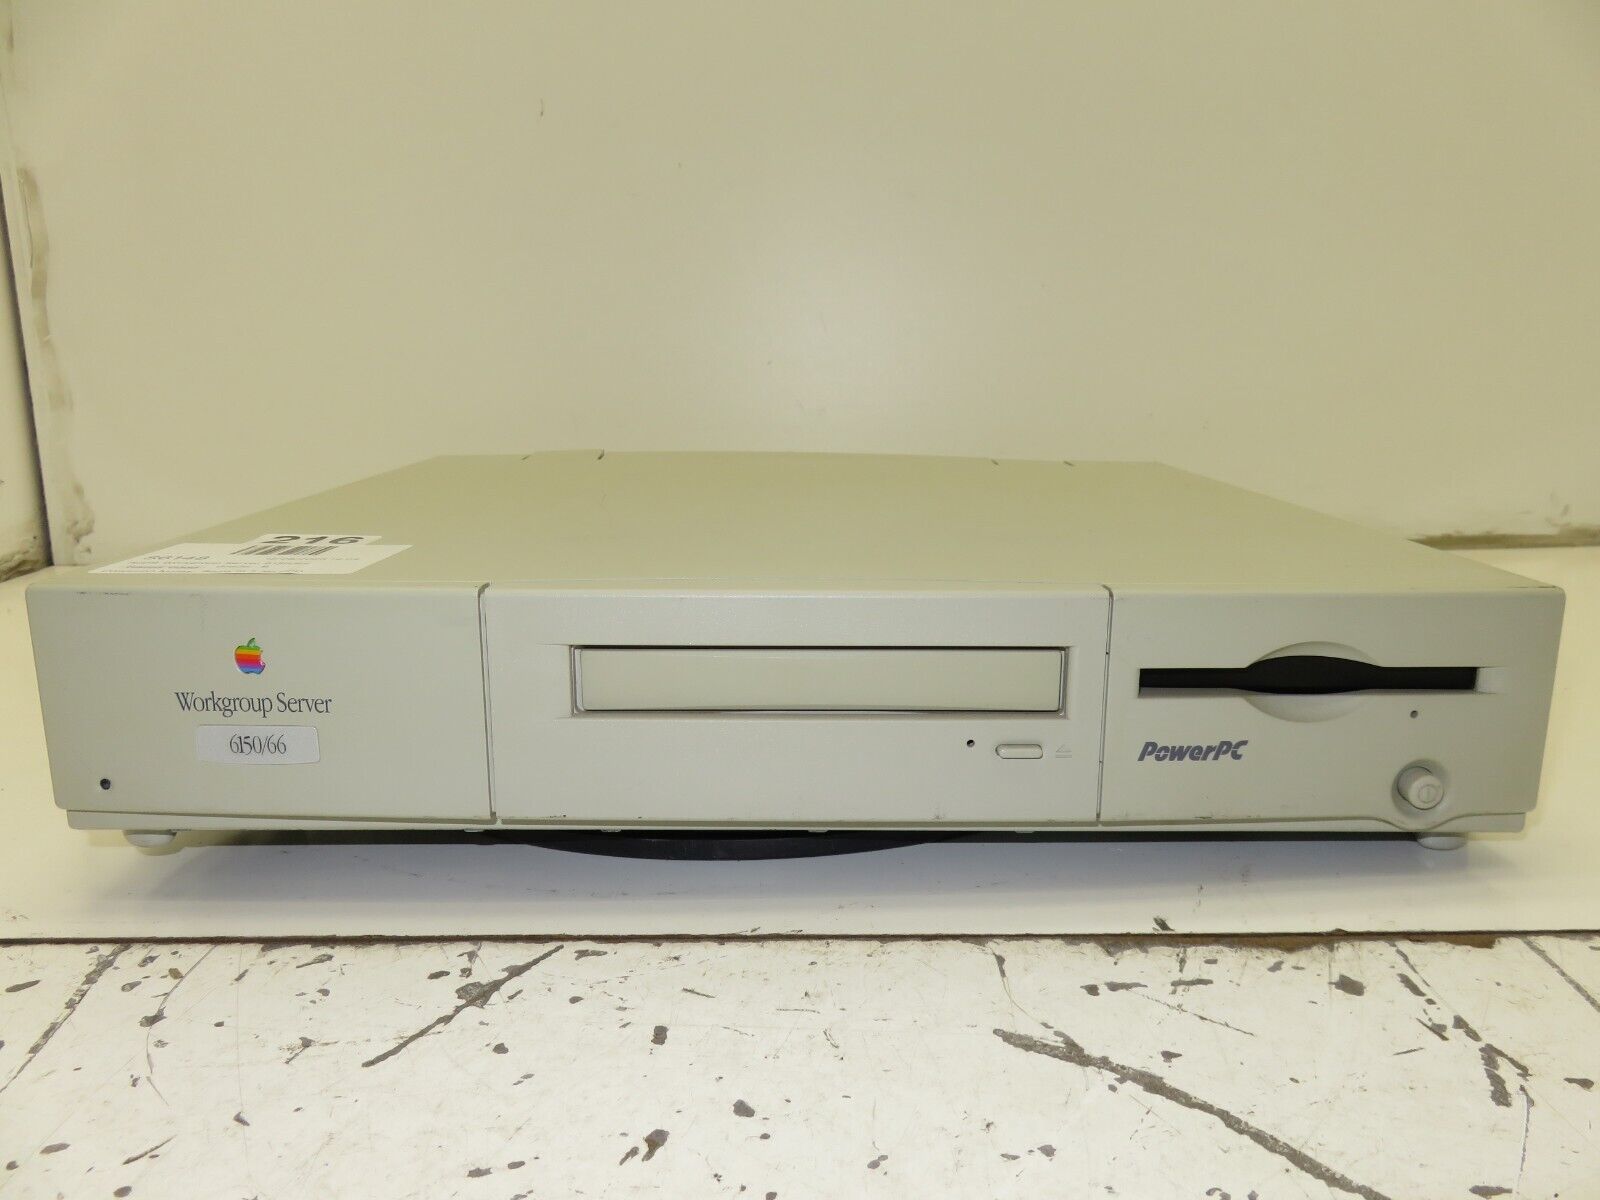 Apple M1596 Workgroup Server 6150/66 - No HDD